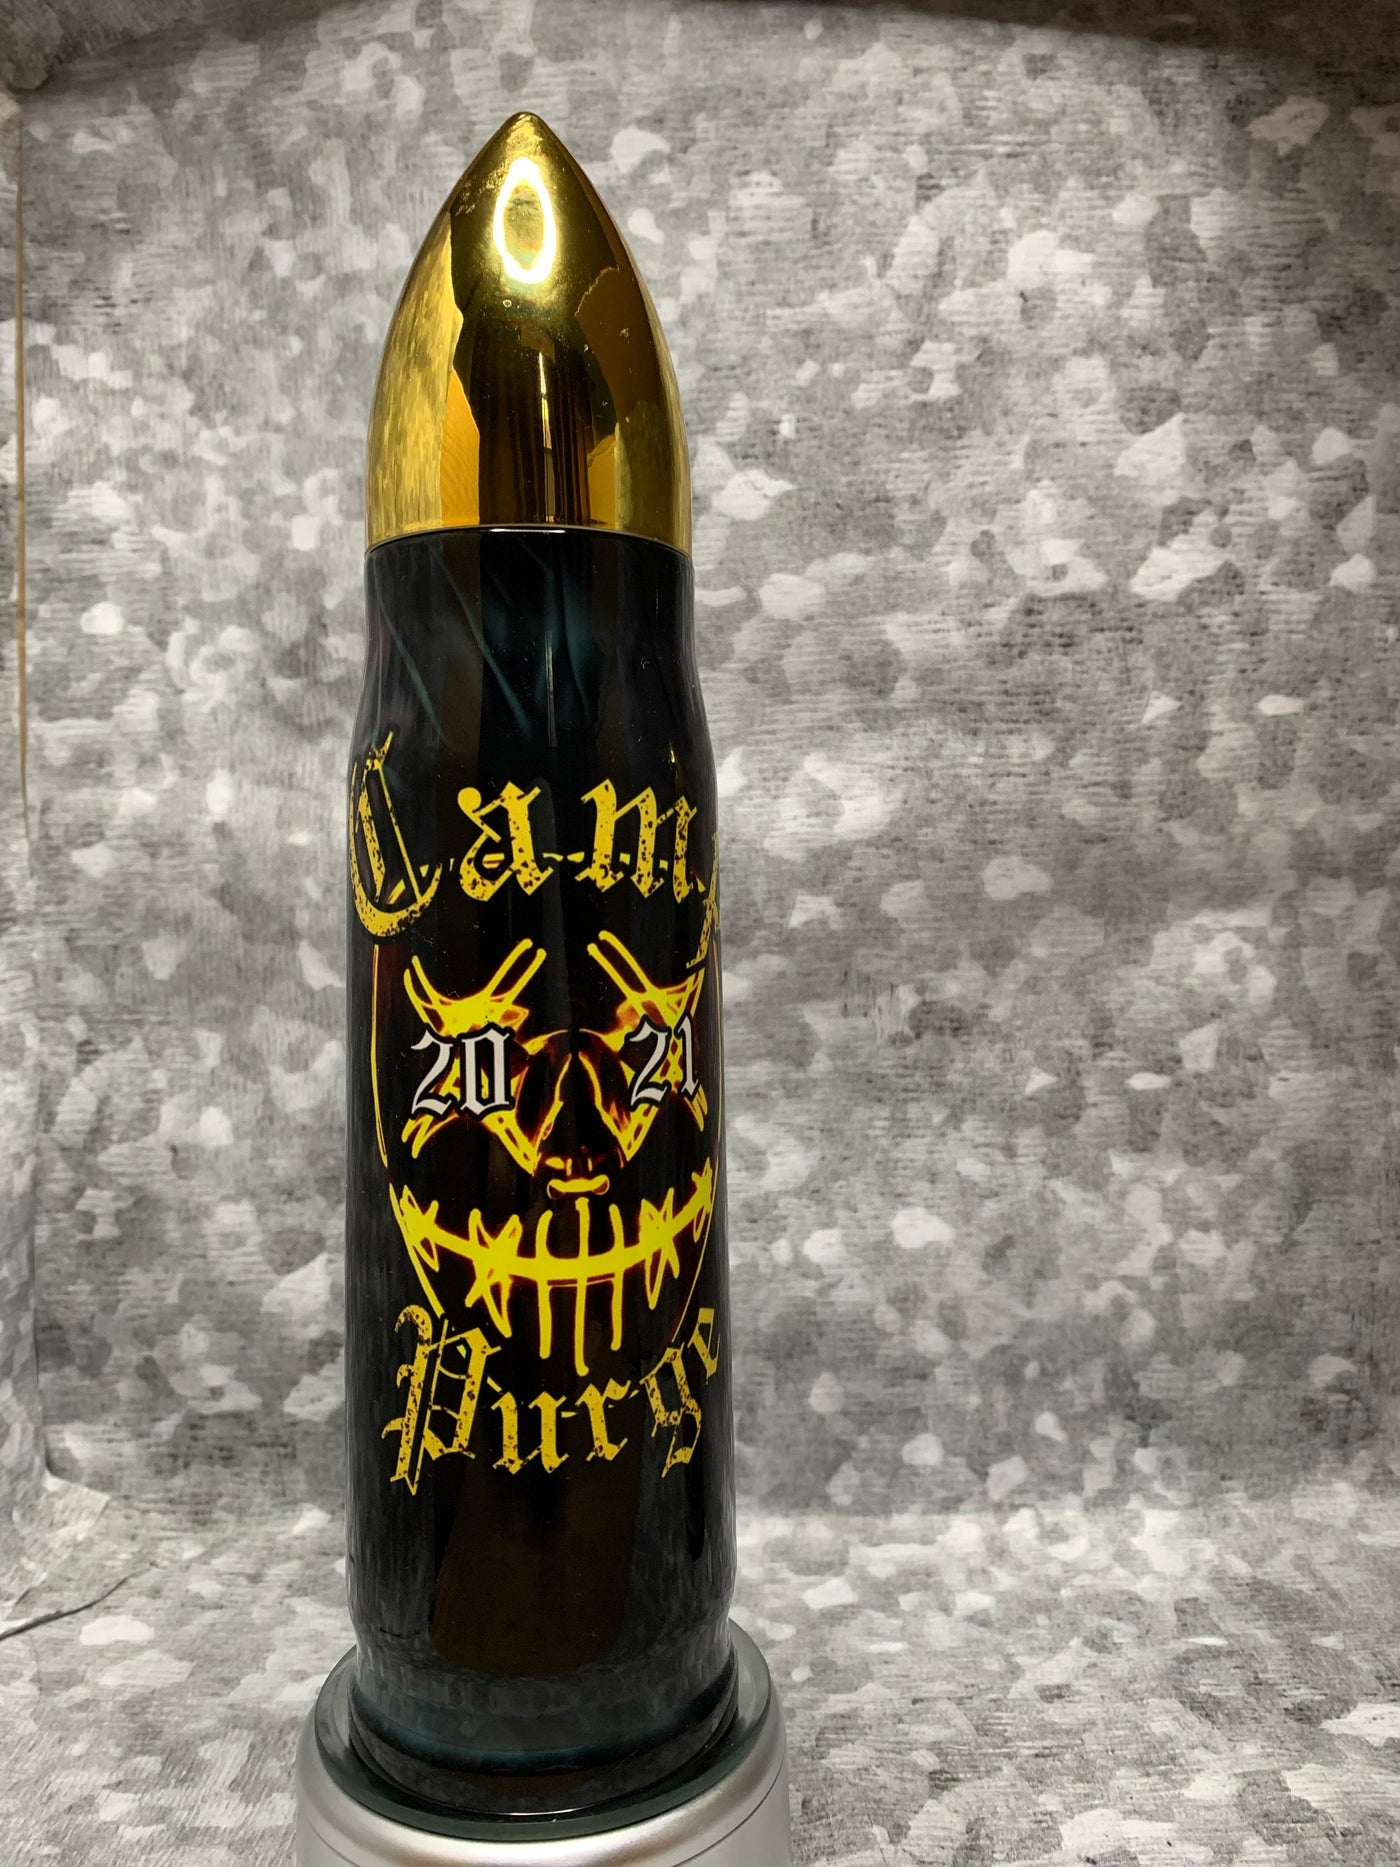 Bullet Thermo Bottle